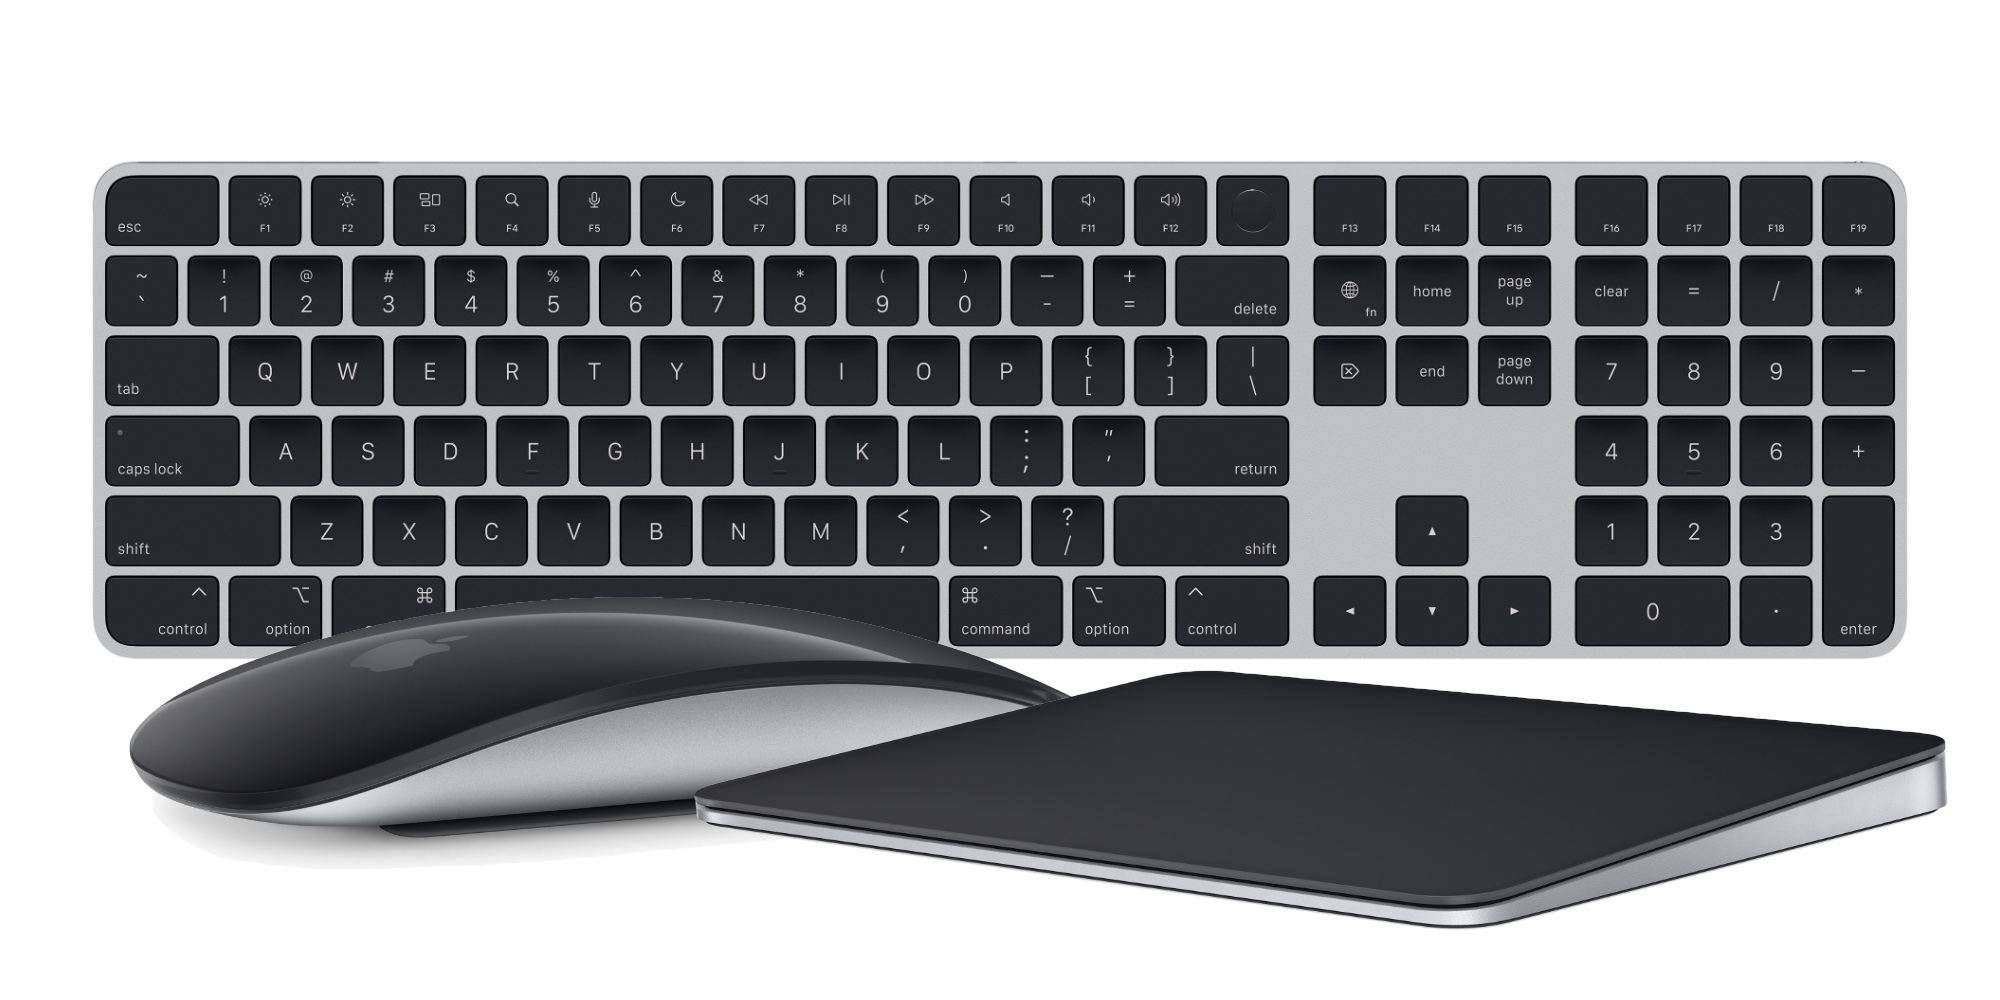 M2 Mac mini starts from $499, Magic Keyboard with Touch ID at $170 